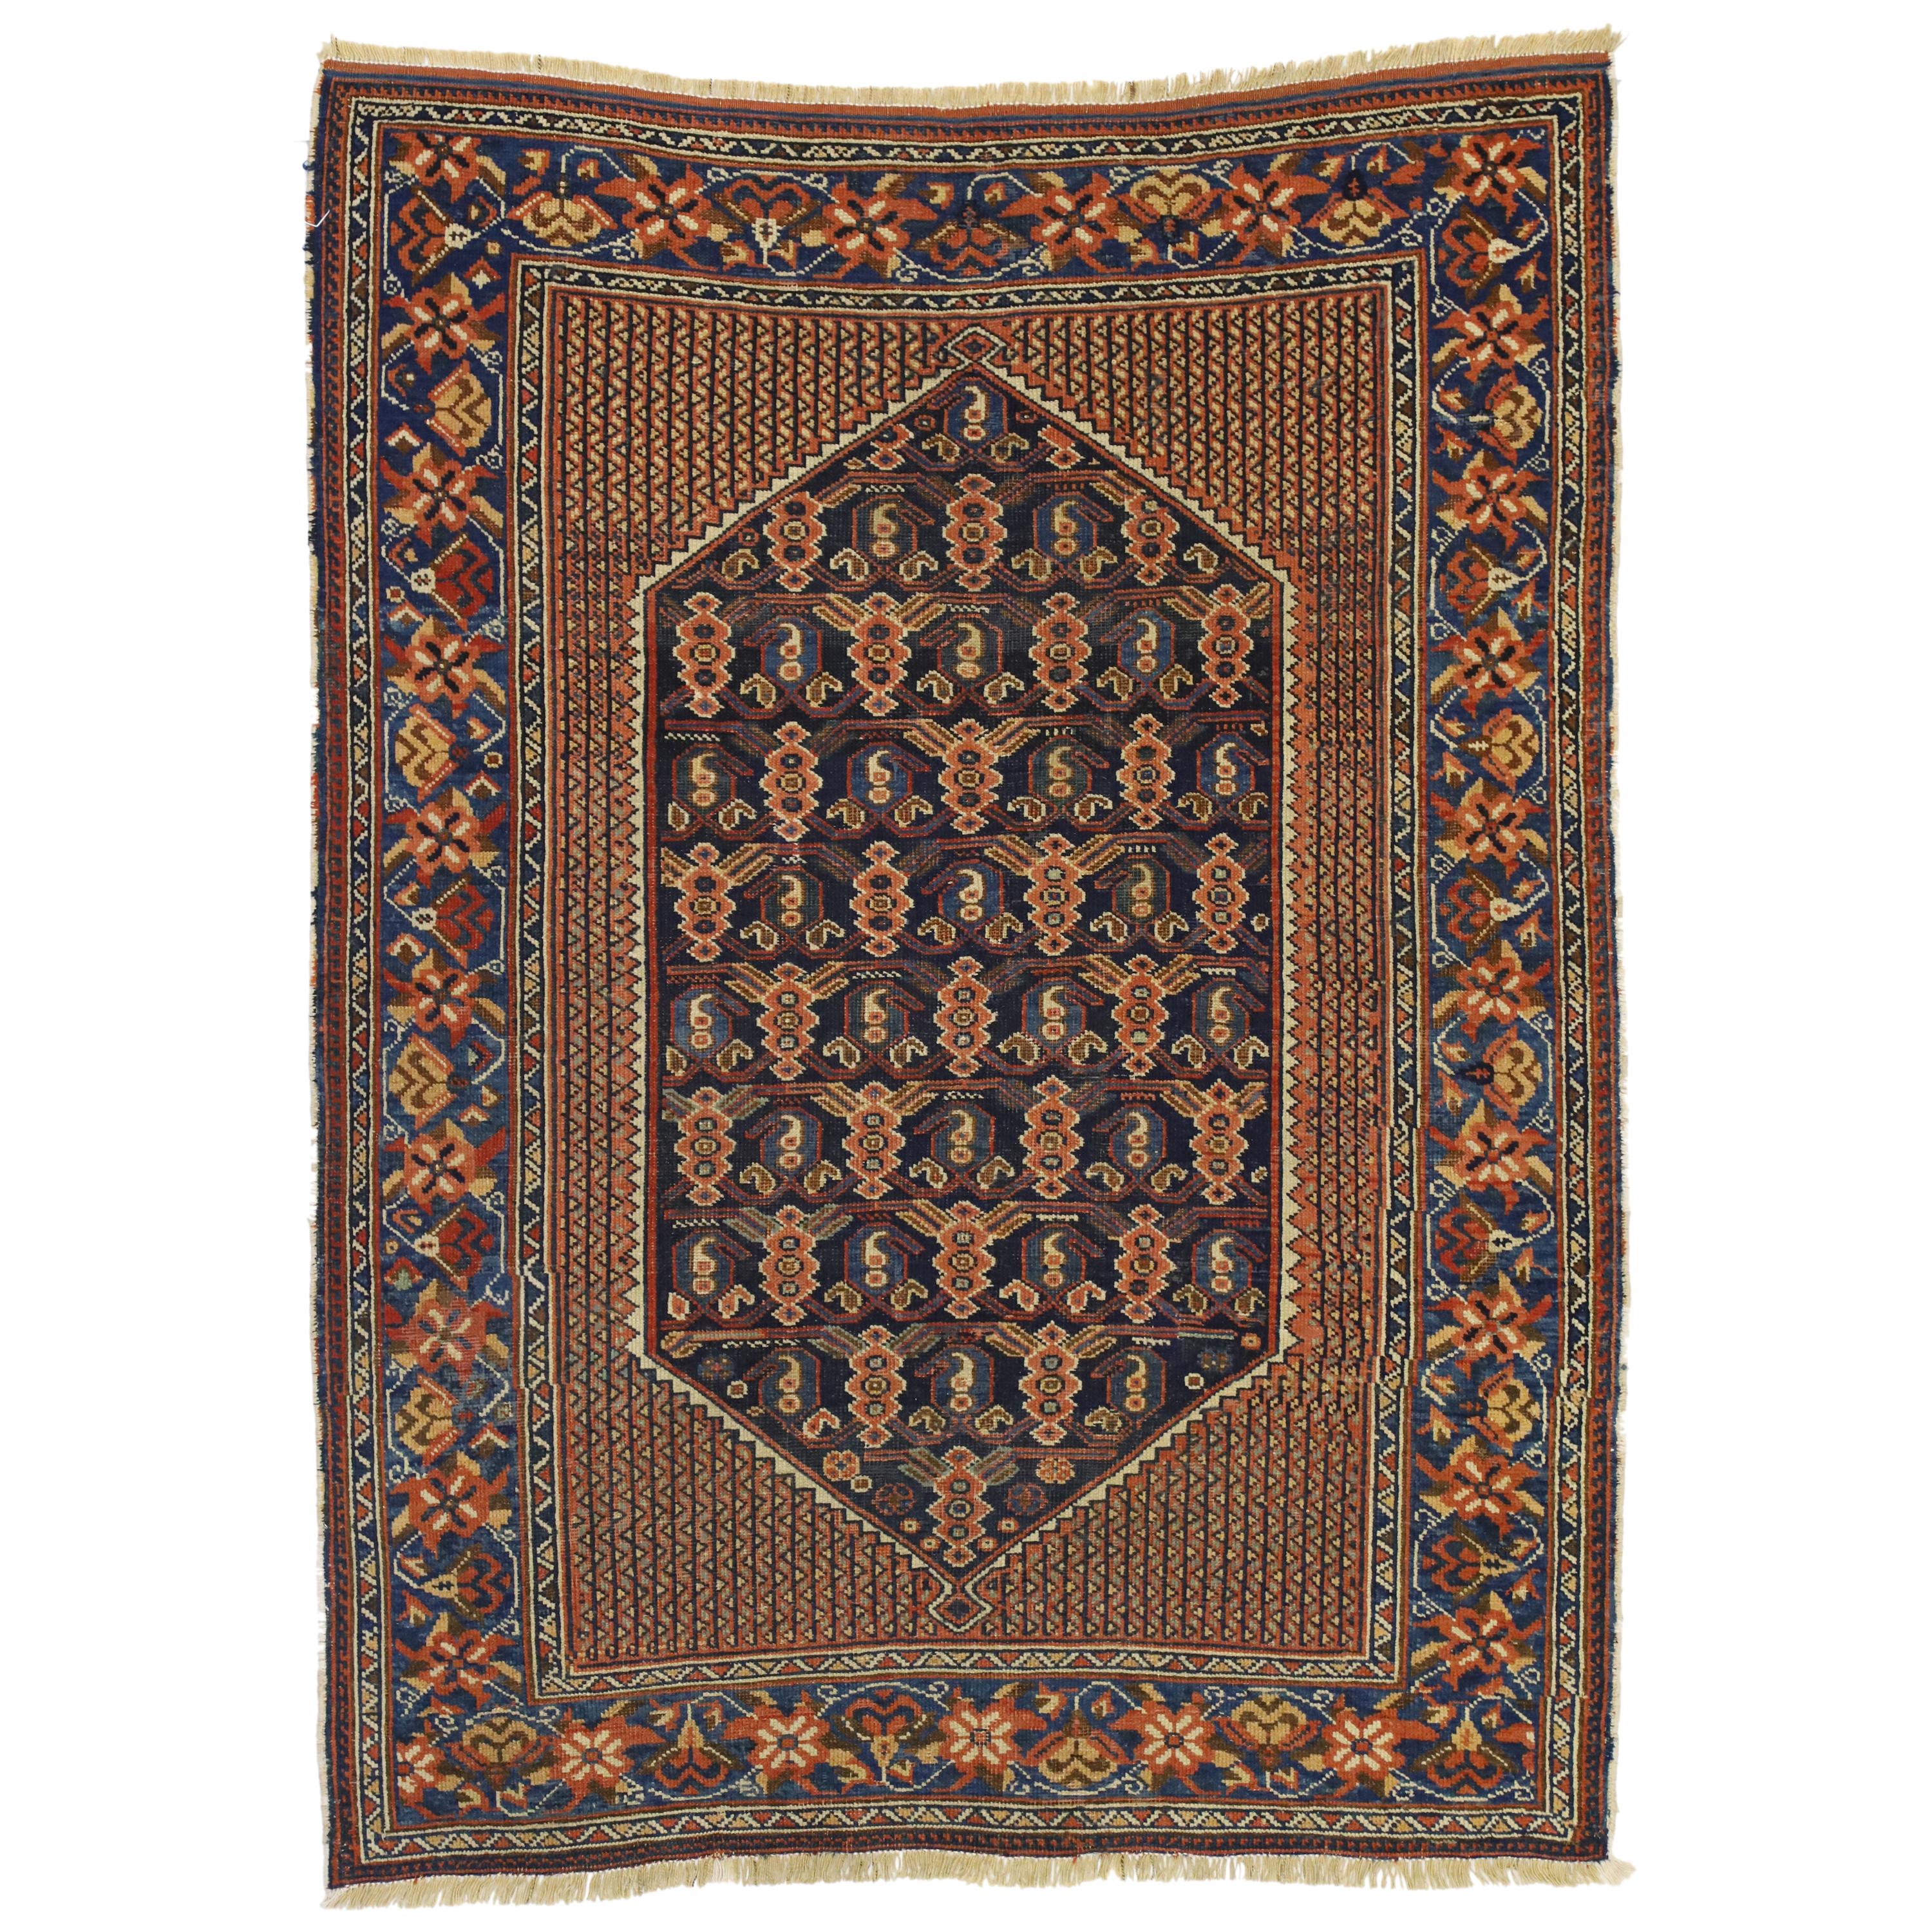 What is the best fabric for an area rug?